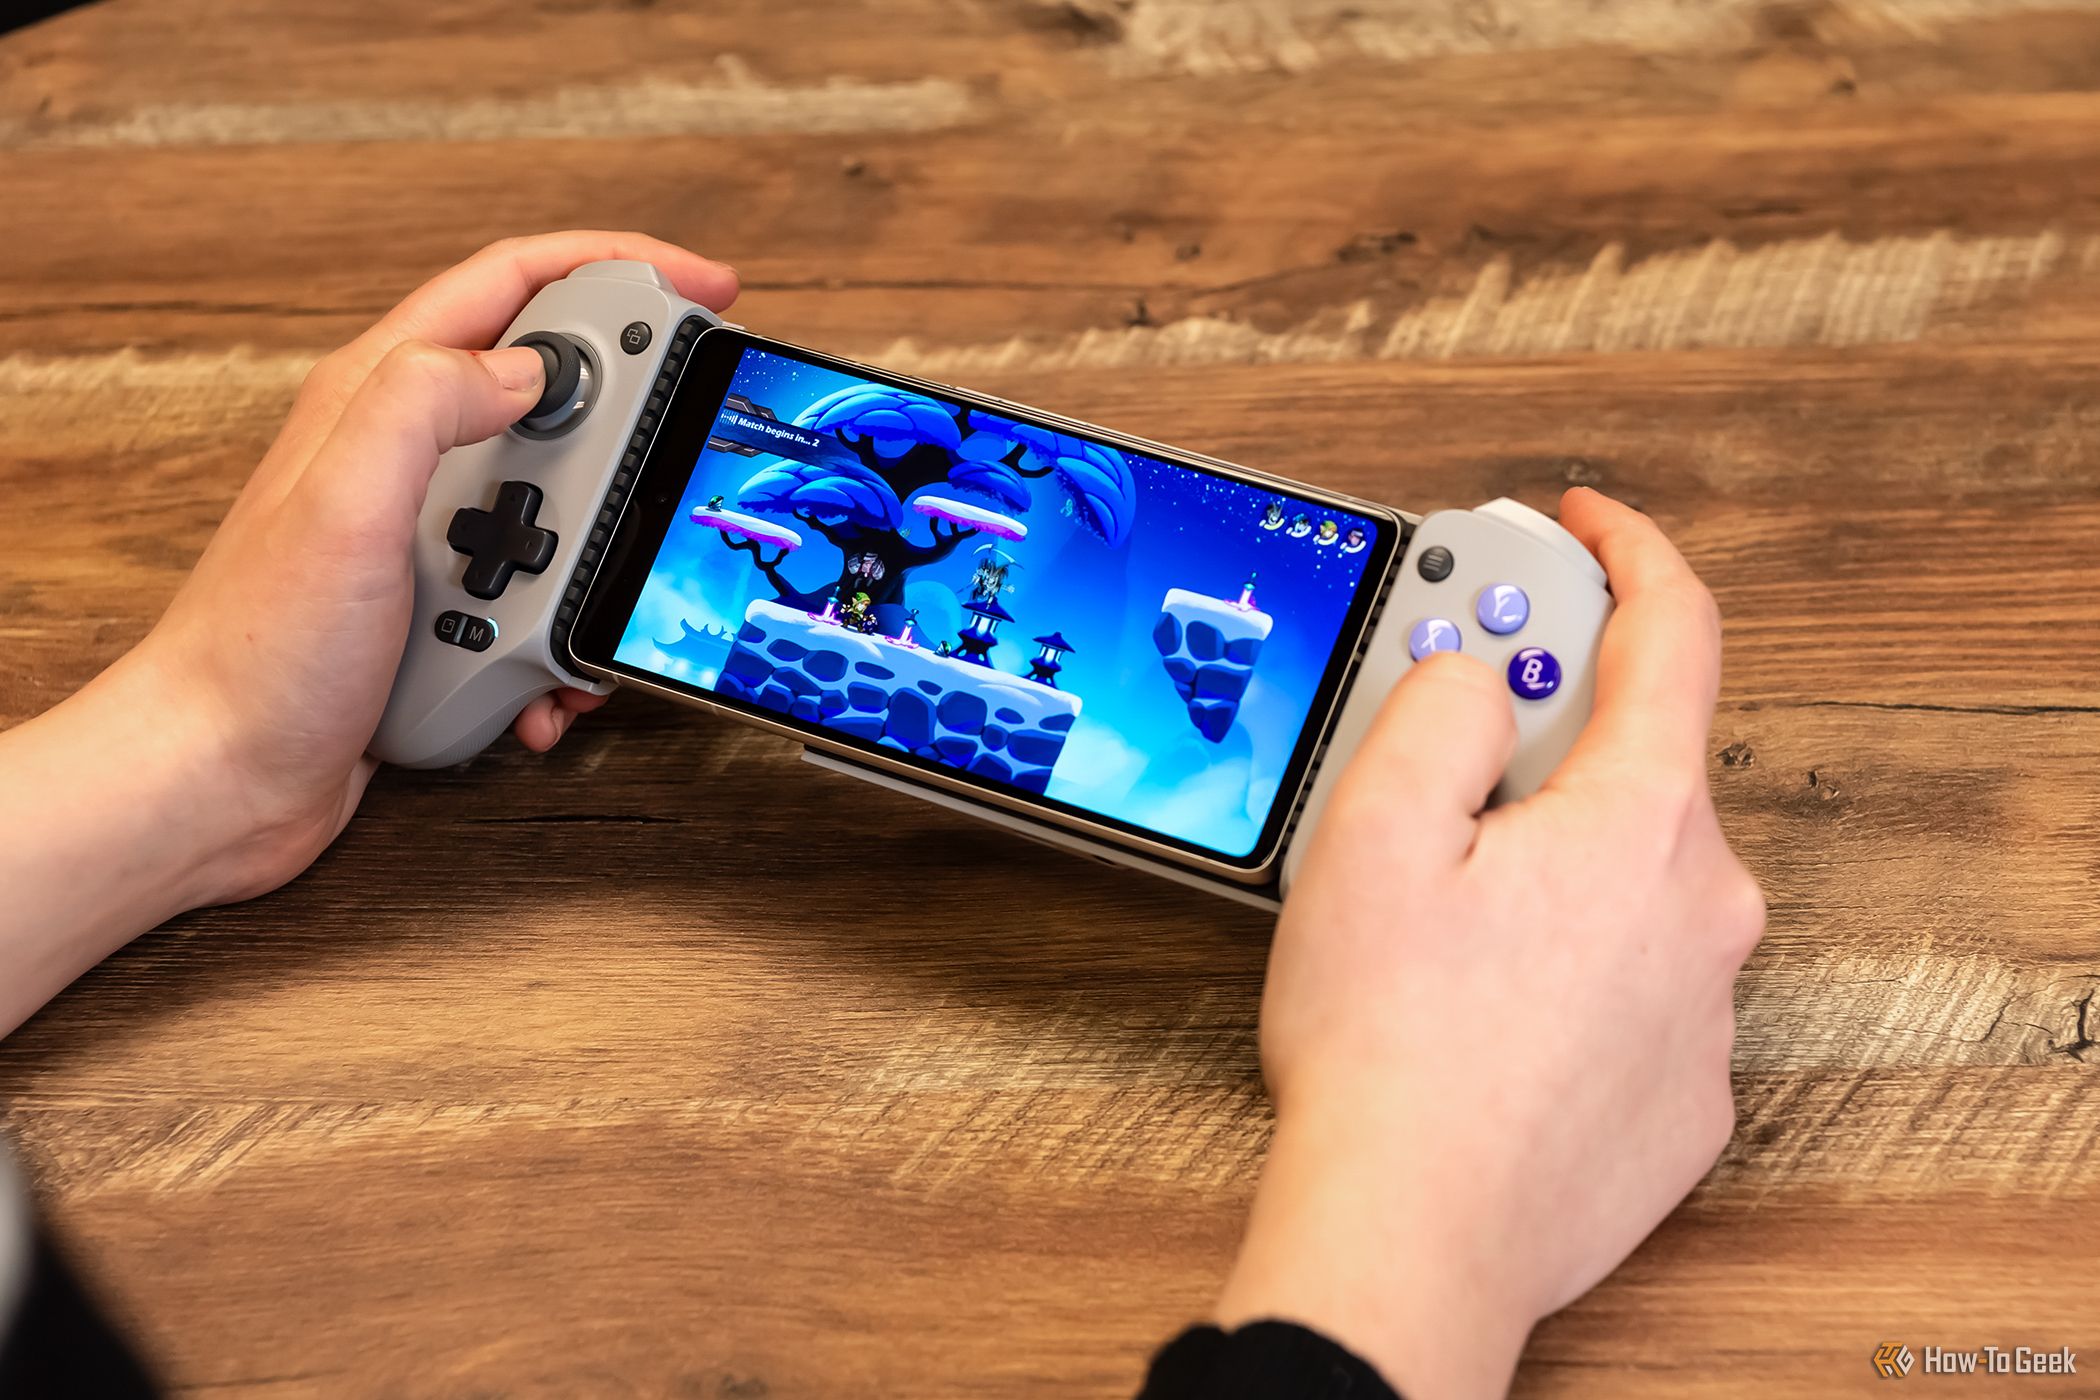 NEW GameSir G8 Galileo Mobile Game Controller: The Best One Yet? 